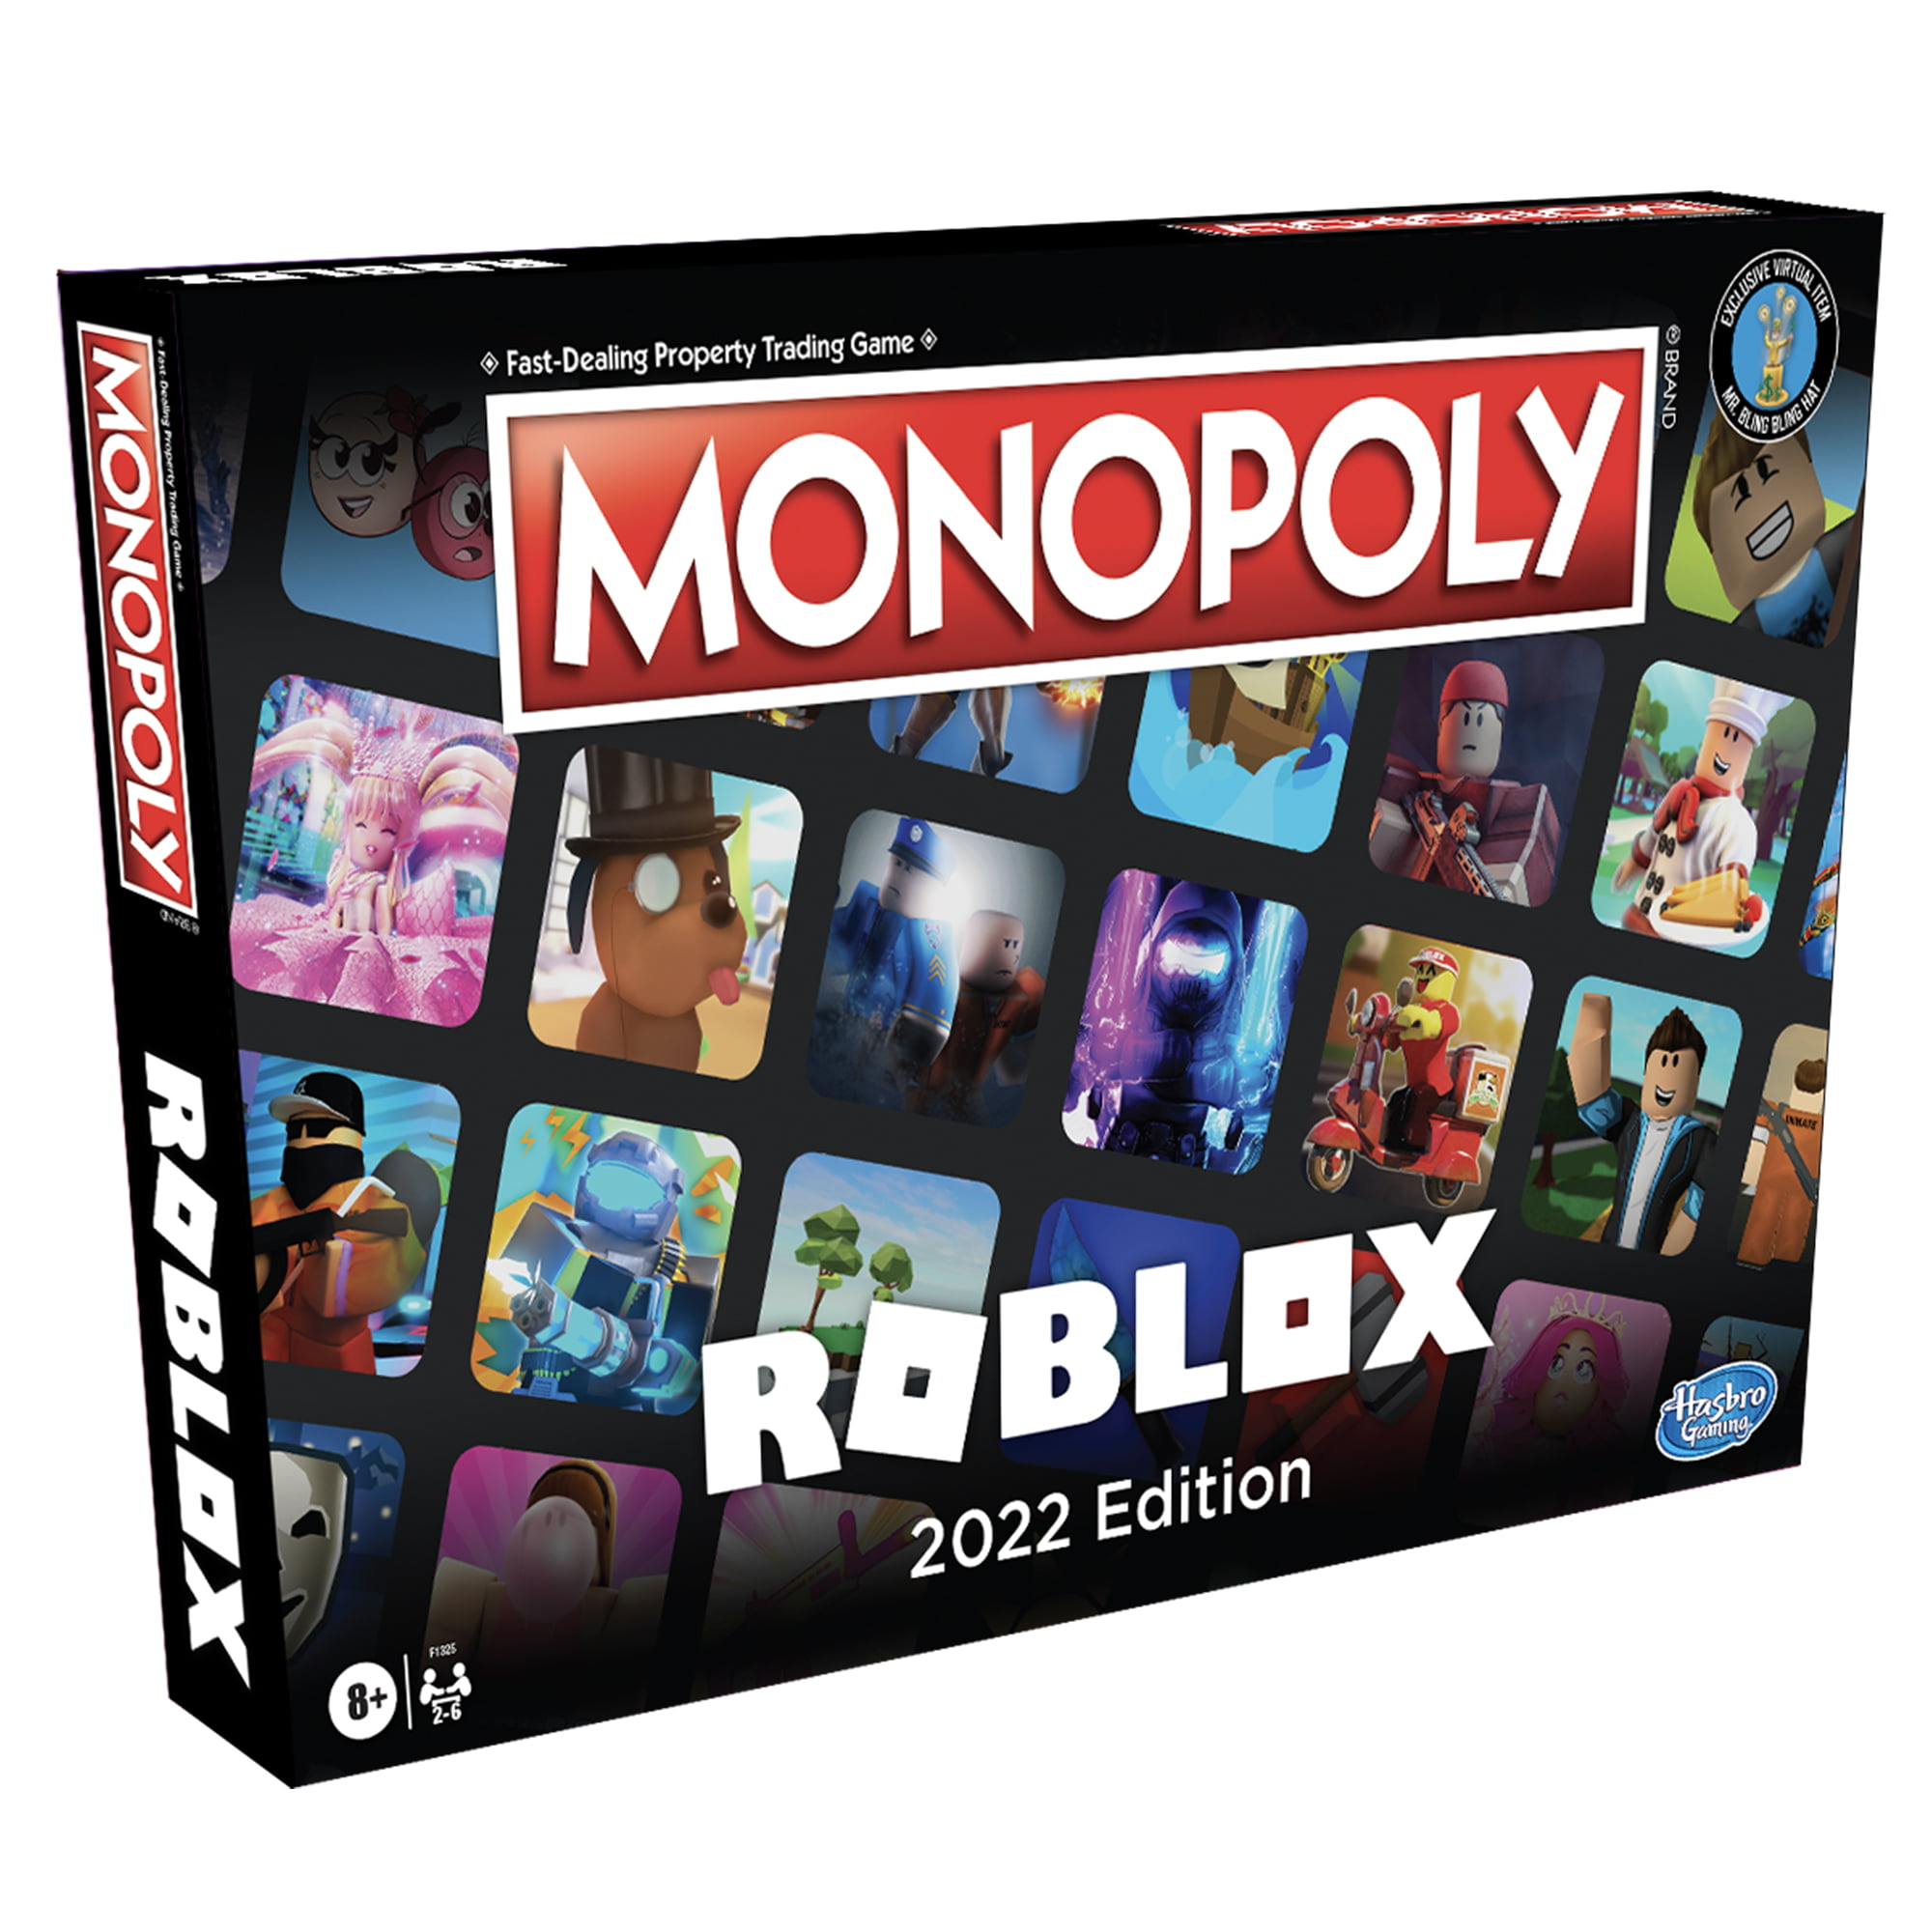 Monopoly Roblox 2022 Edition, Board Game, Buy, Sell, Trade Popular